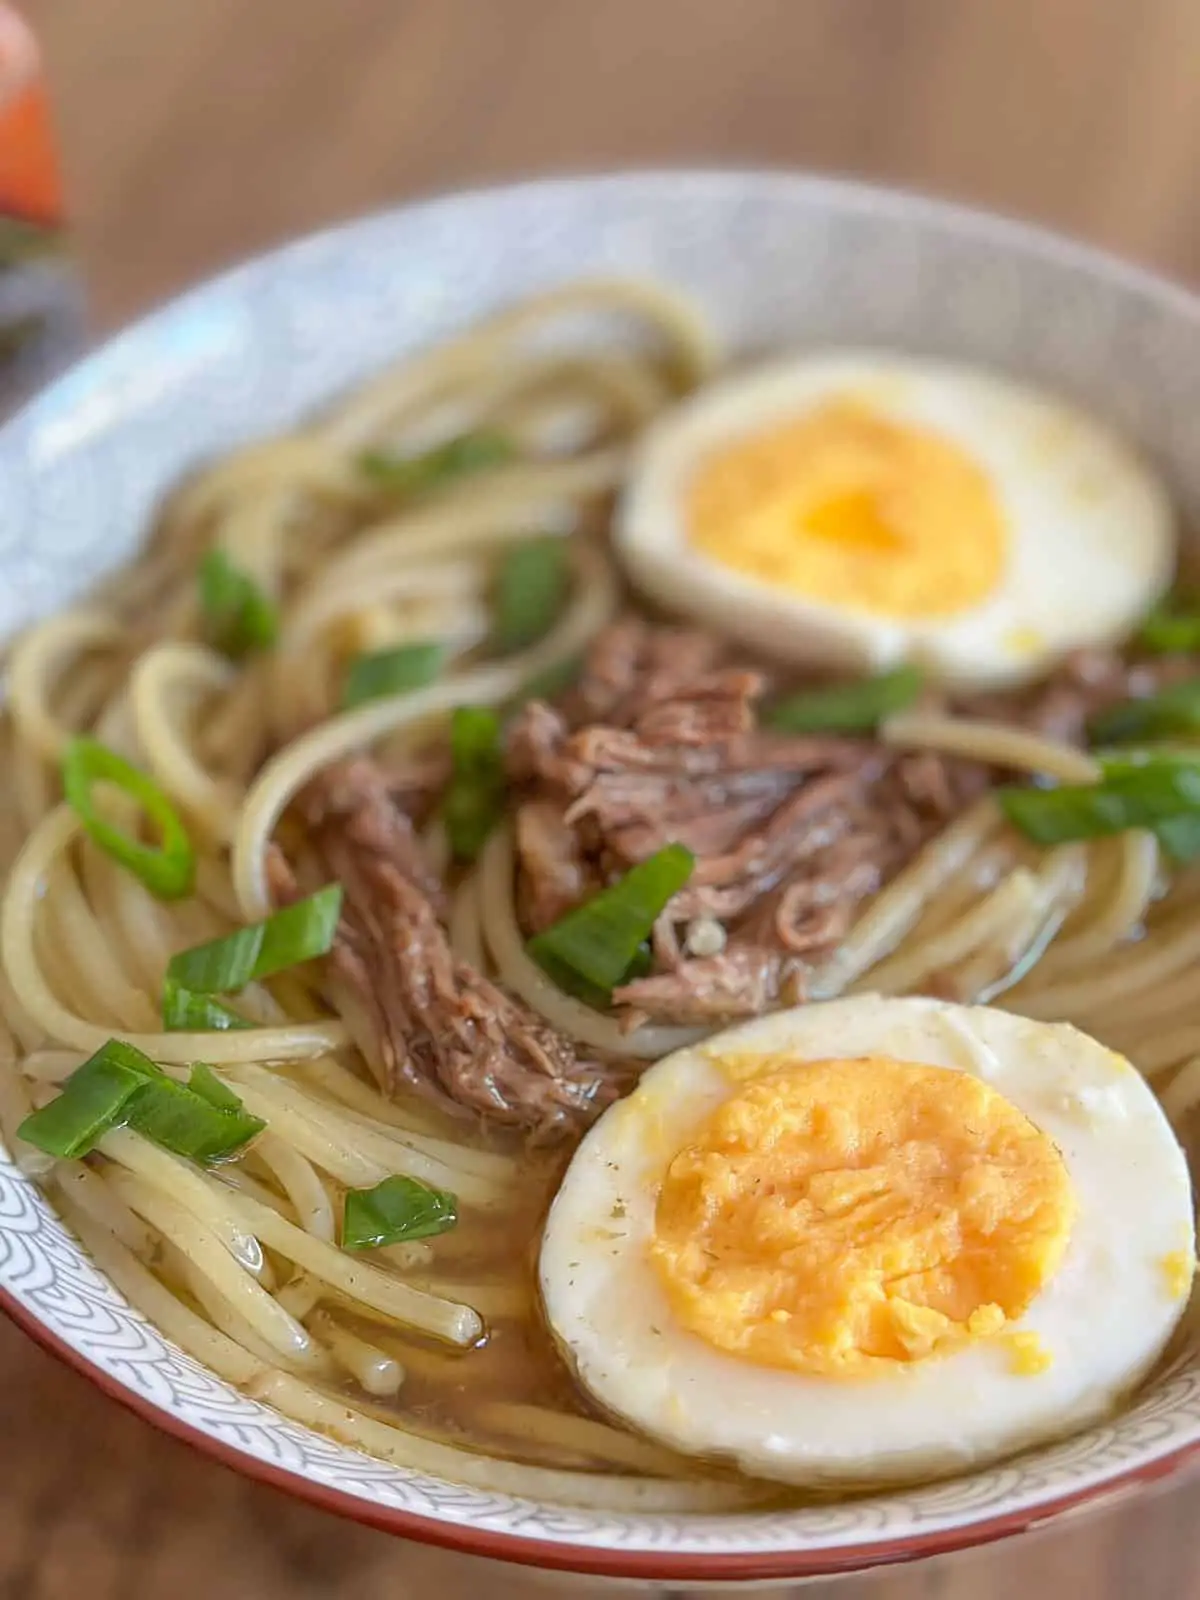 Shredded beef and noodles in a beef broth with hard boiled eggs which have been halved and green onions garnishing the noodle soup which was placed in a soup bowl with a bottle of Tabasco in the background.